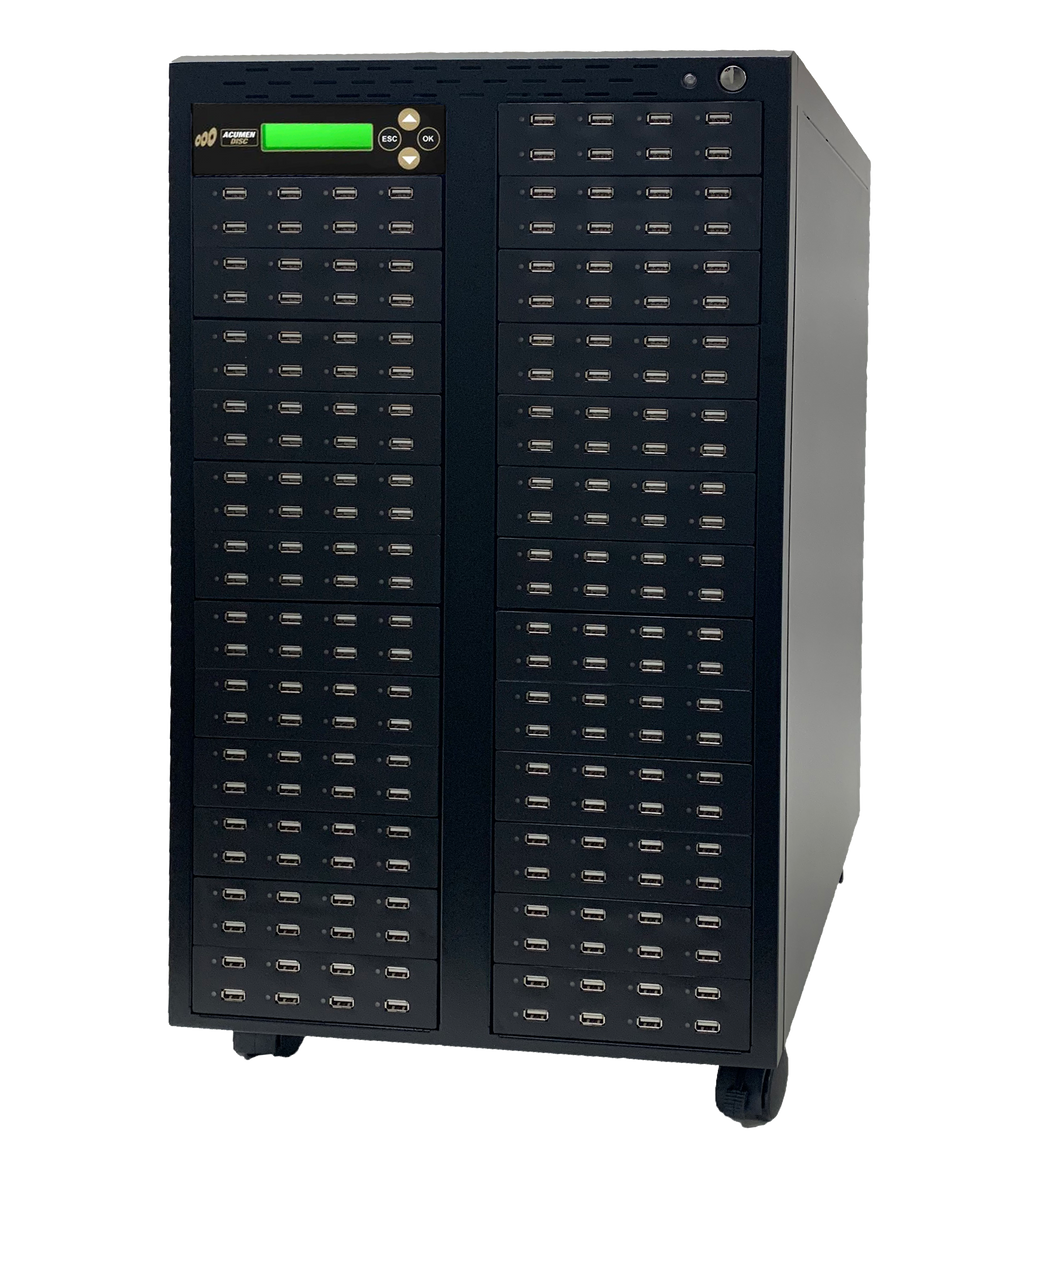 Acumen Disc 1 to 199 USB Drive Duplicator - Multiple Flash Memory Copier / SSD / External Hard Drive Clone (Up to 35mbps) & Sanitizer (DoD Compliant)